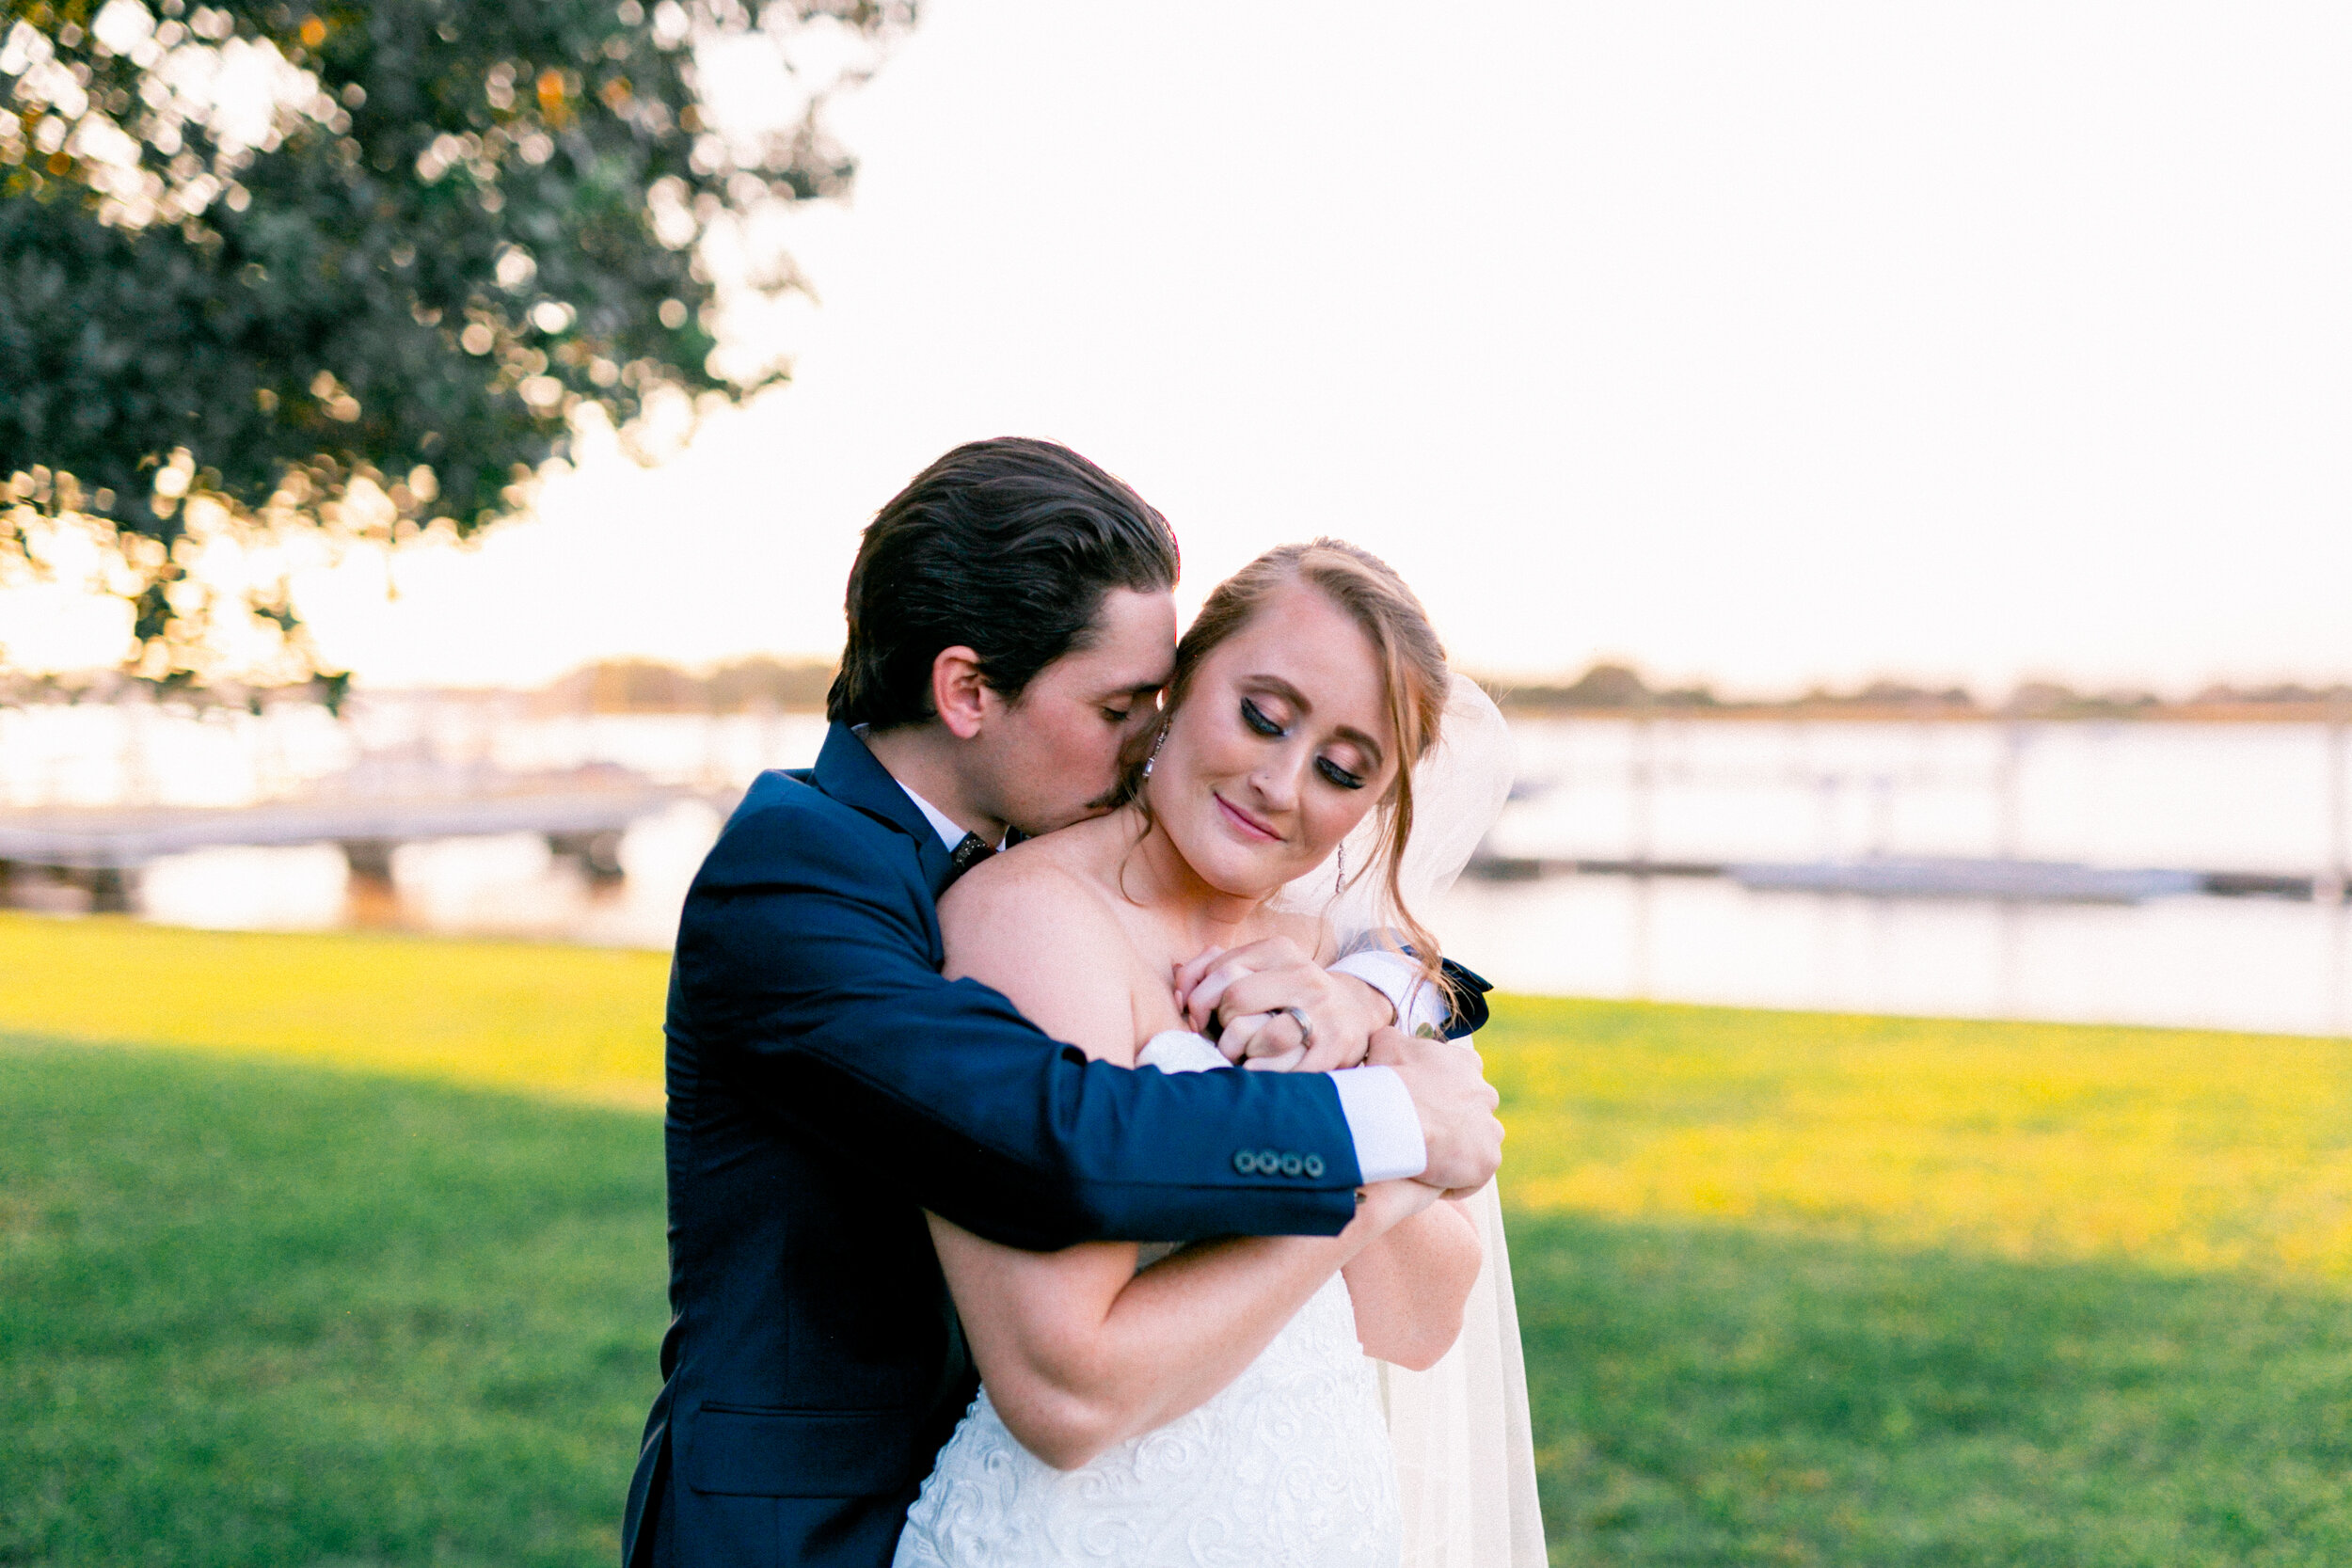 Sweet moment shared by a Charleston wedding couple.